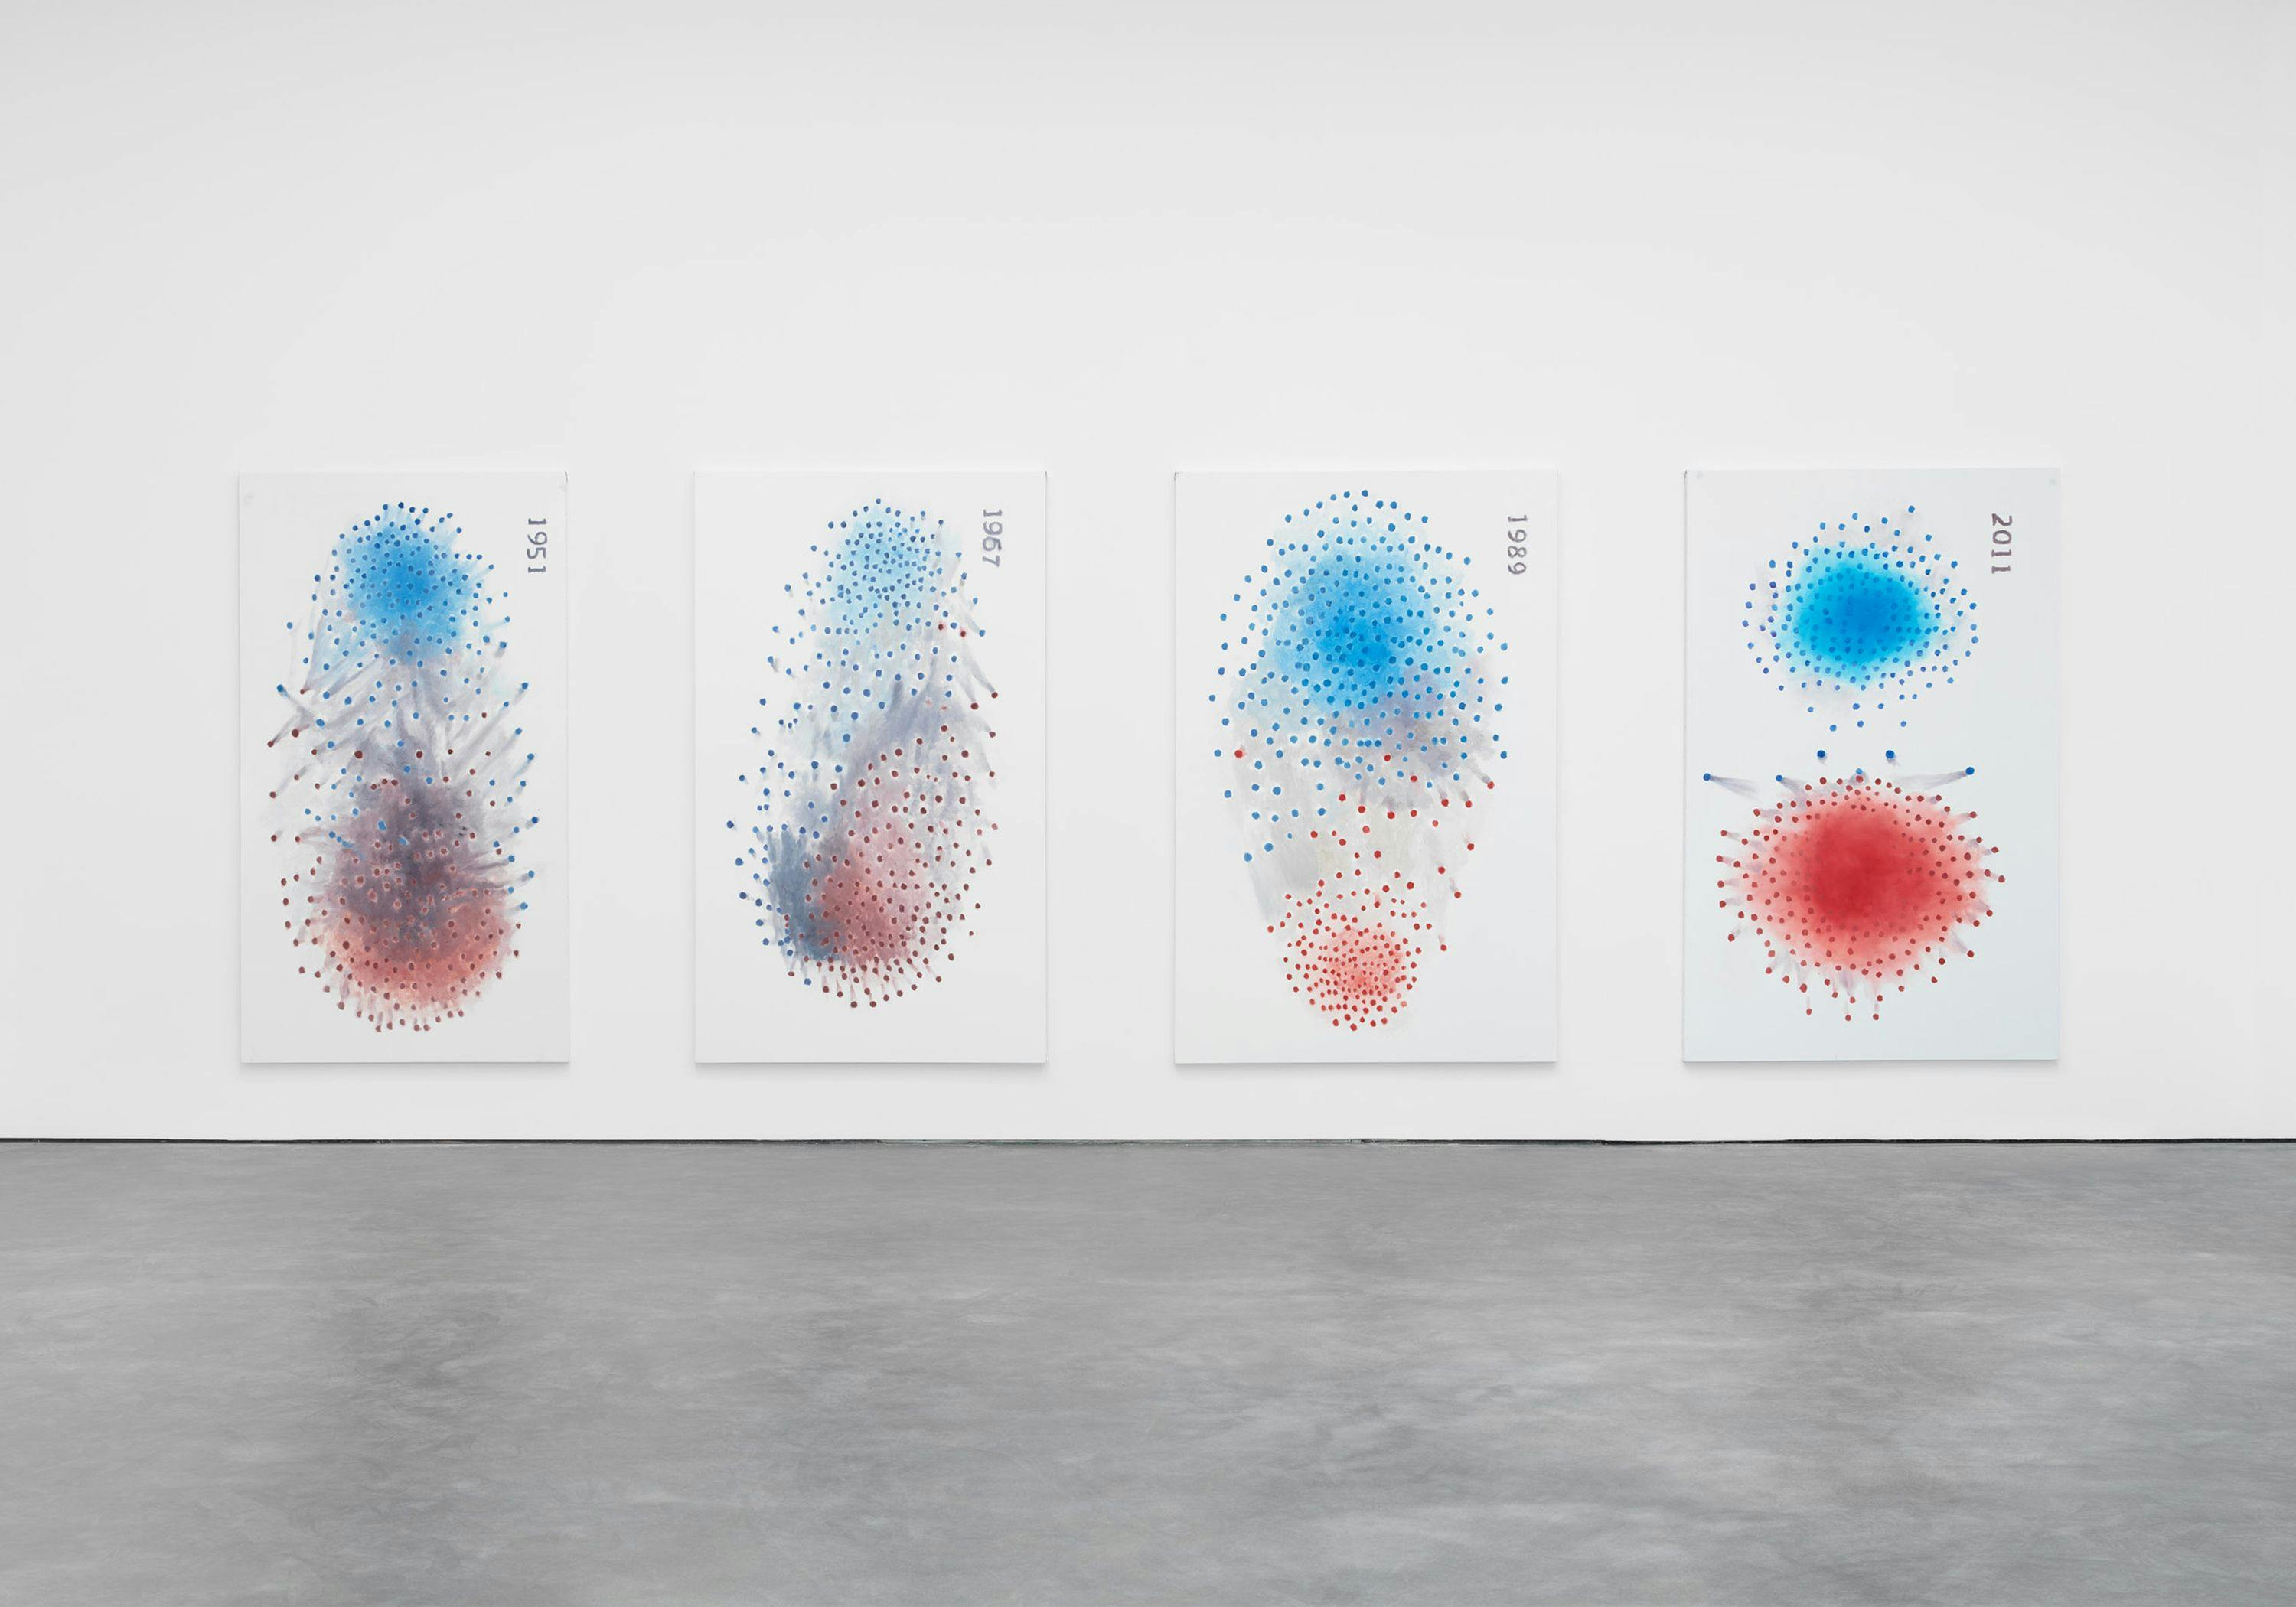 A series by Luc Tuymans, titled Polarisation - Based on a data visualization by Mauro Martino, dated 2021.